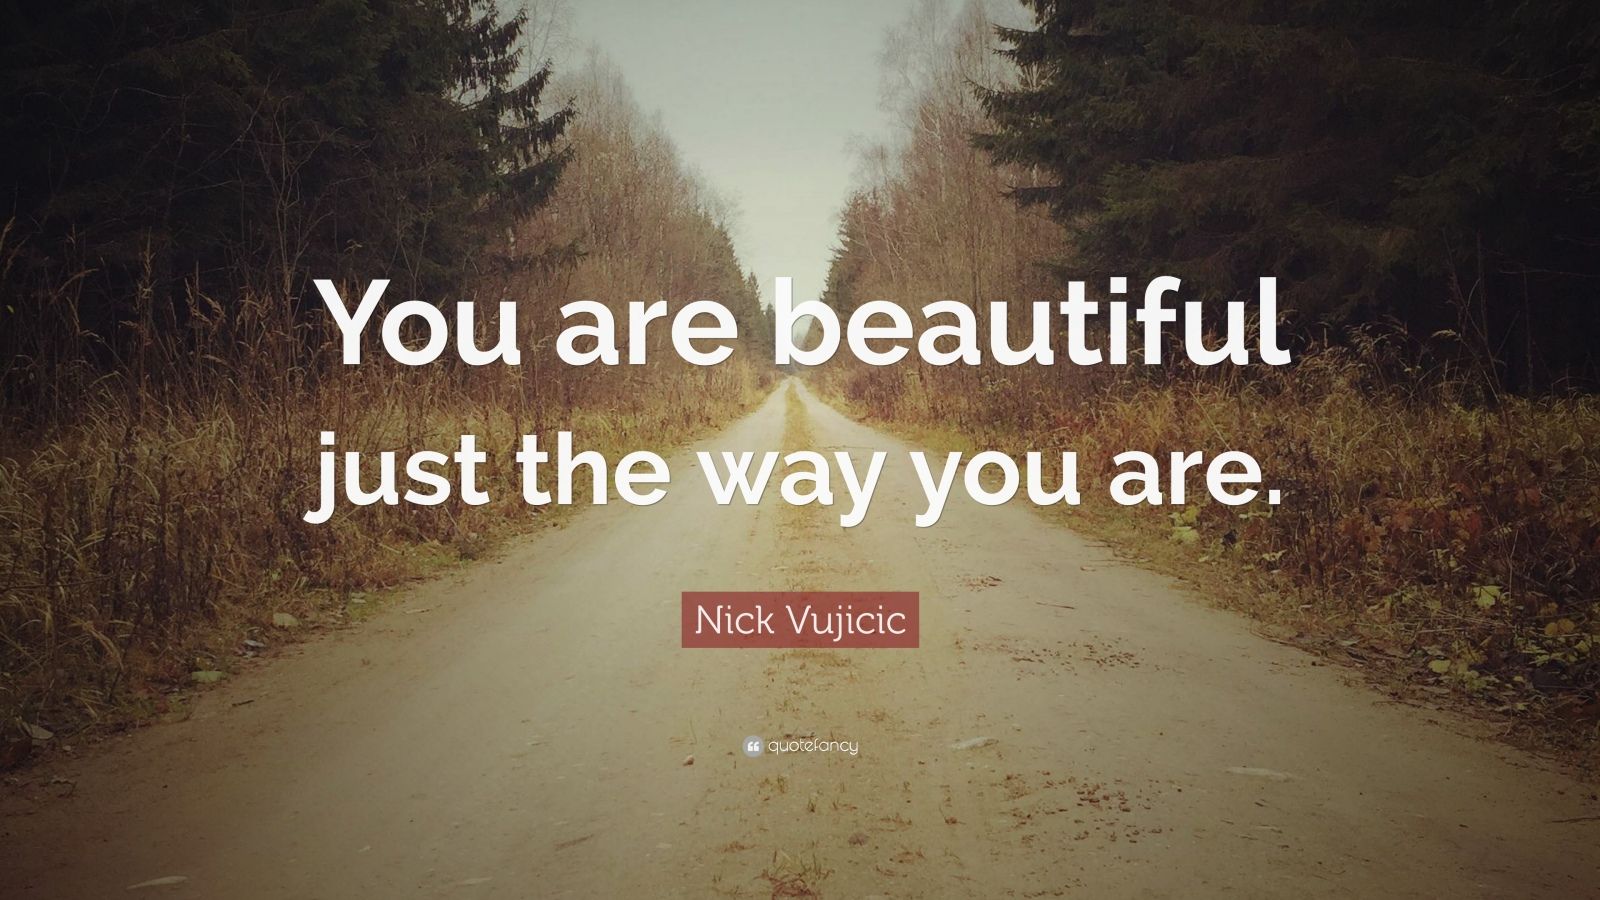 Nick Vujicic Quote: "You are beautiful just the way you ...